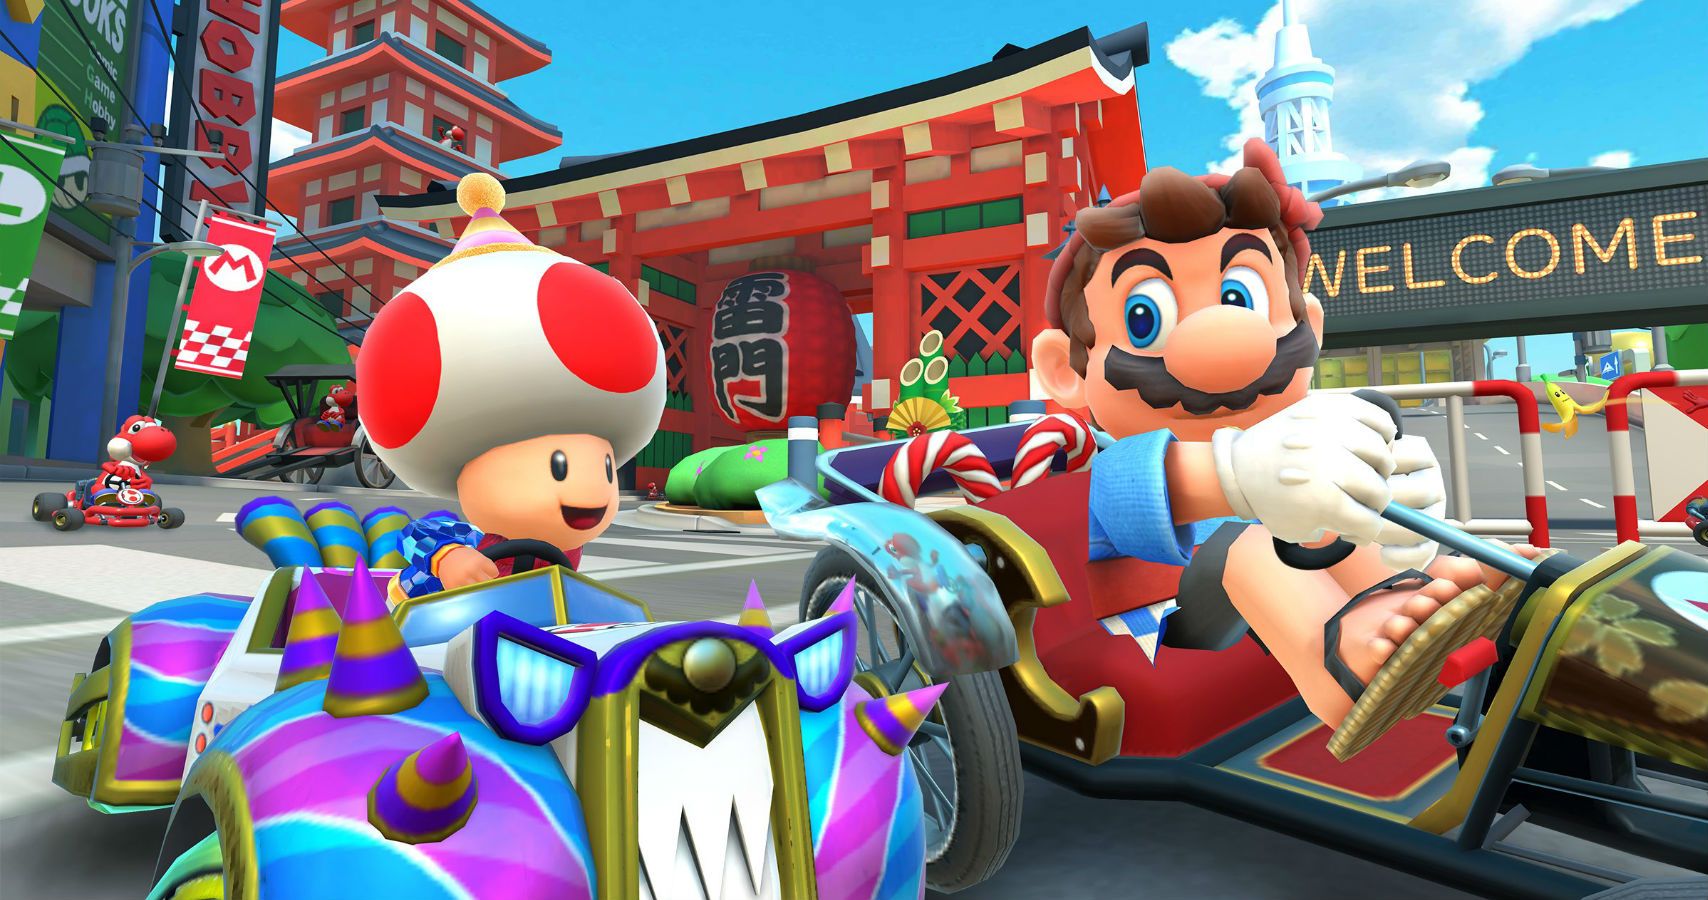 Research Predicts People Will Be Playing A Whole Lot More Mario Kart This Christmas